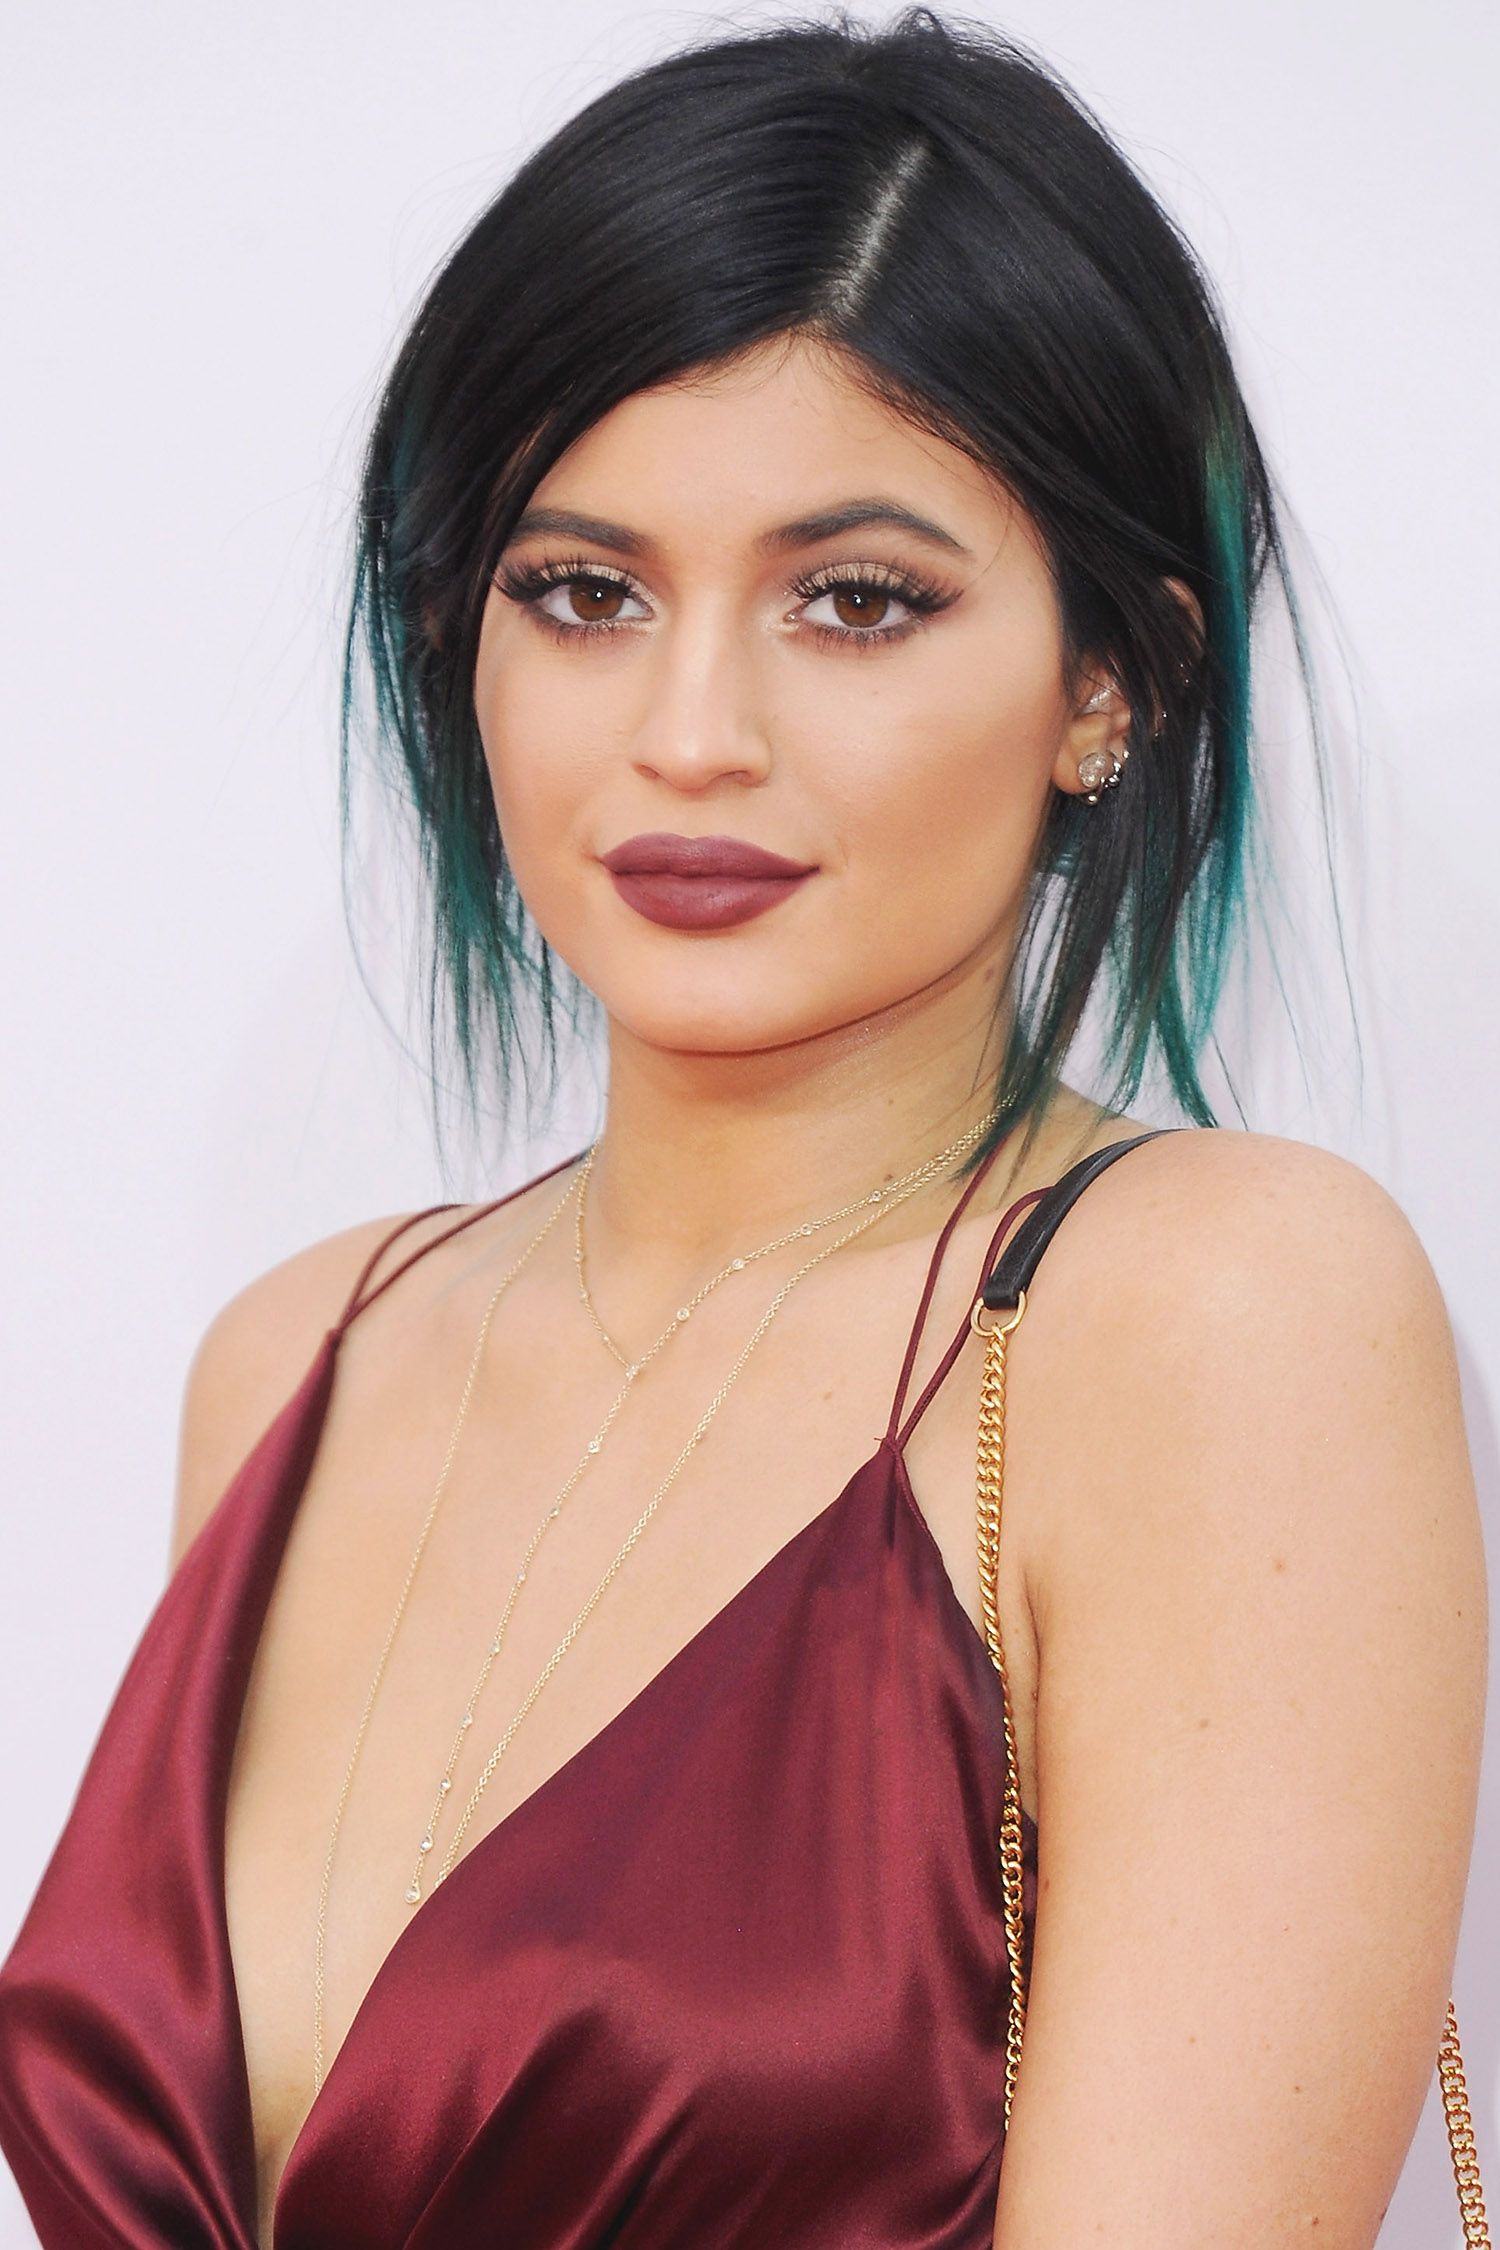 Kylie Jenner Net Worth 2019 In Rupees - SelebrityToday